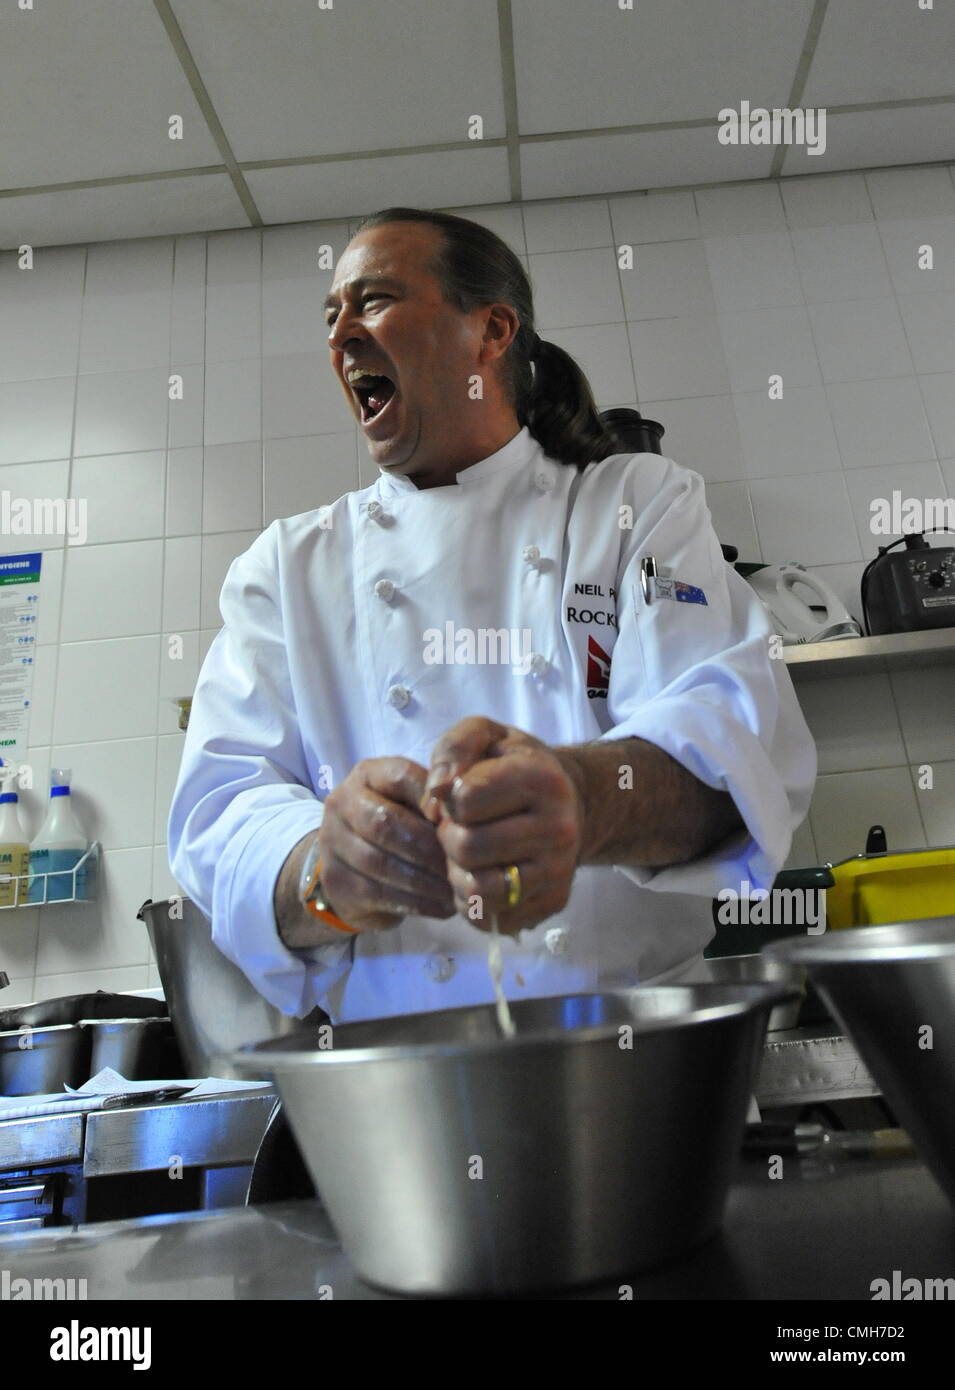 JOHANNESBURG, SOUTH AFRICA: Top Australian chef Neil Perry on August 6, 2012 in the kitchen of the Level Four Restaurant of the 54 on Bath hotel in Johannesburg, South Africa. Perry got a better understanding of South African cooking styles during a cooking demonstration filmed for Australian television. (Photo by Gallo Images / Duif du Toit) Stock Photo